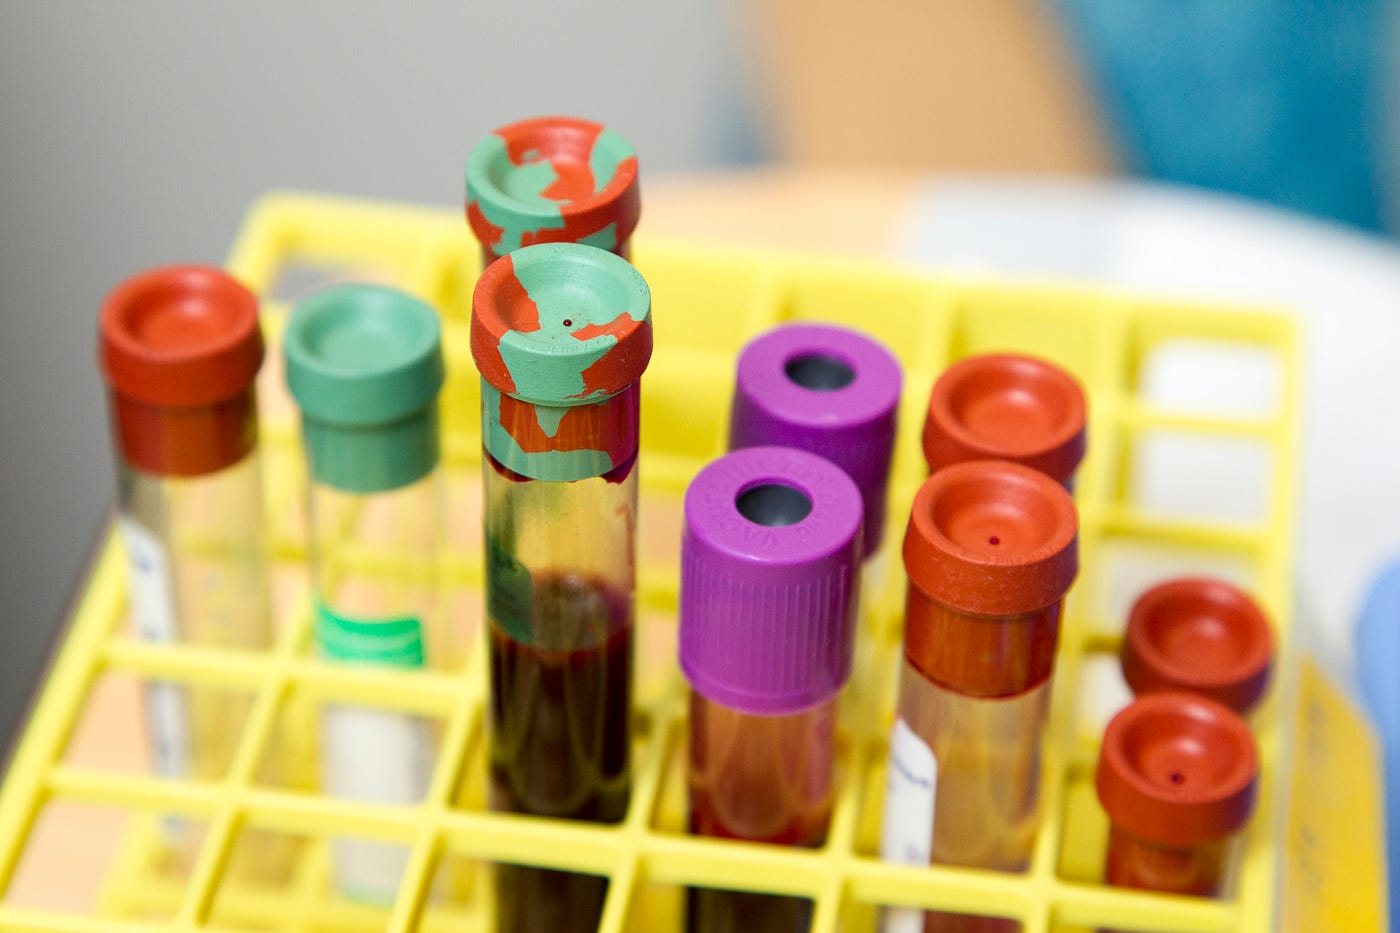 A tray of blood collection tubes with various colored tops. The recent FDA approval for an investigational device study of the Galleri test heralds a new era in cancer screening. The potential of this blood test to detect multiple types of cancer at an early stage could reshape the landscape of cancer diagnosis and treatment.